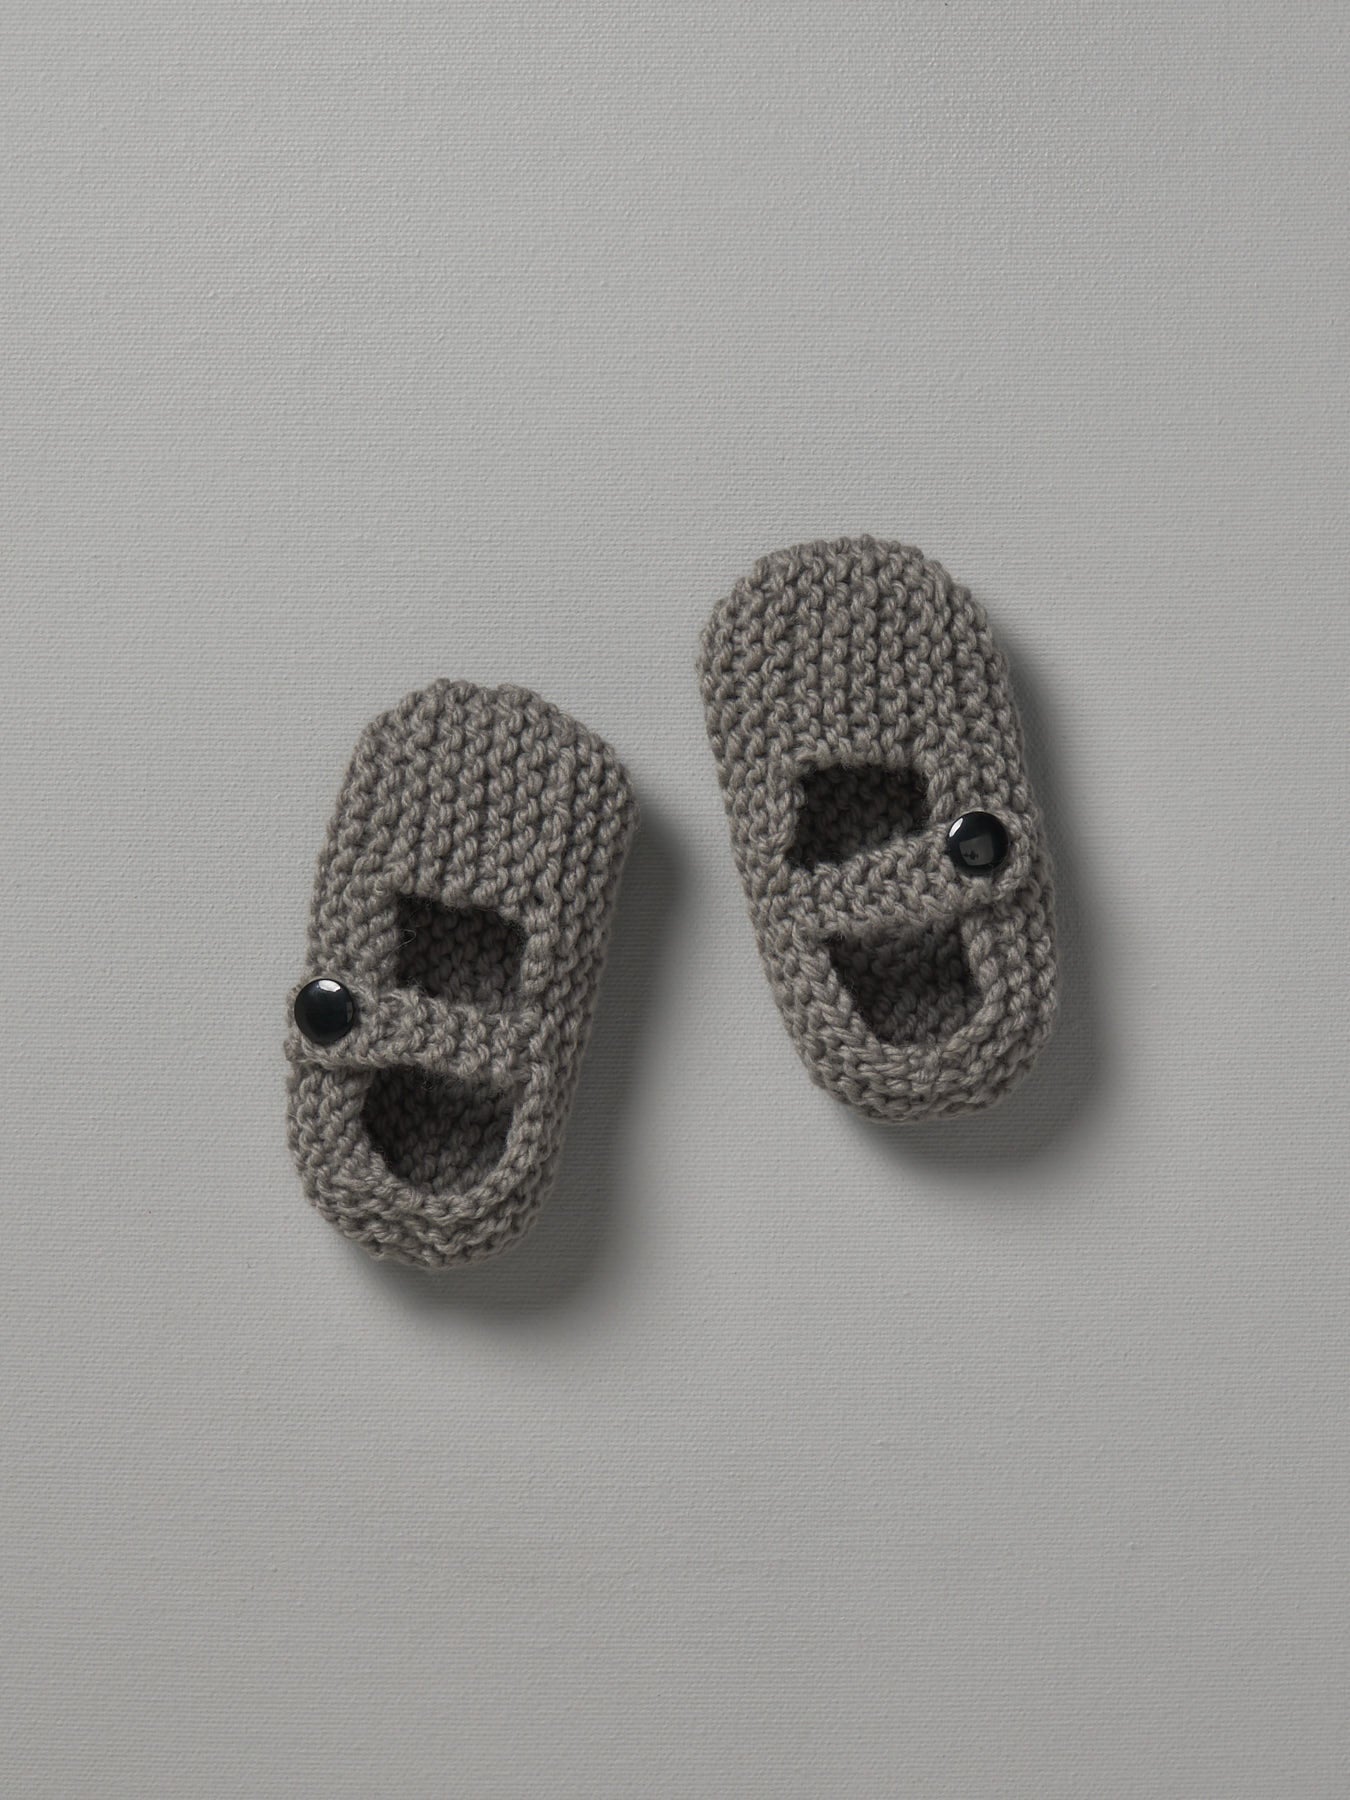 A pair of Weebits Hand Knitted Mary Jane Shoes in Mushroom color on a white surface.